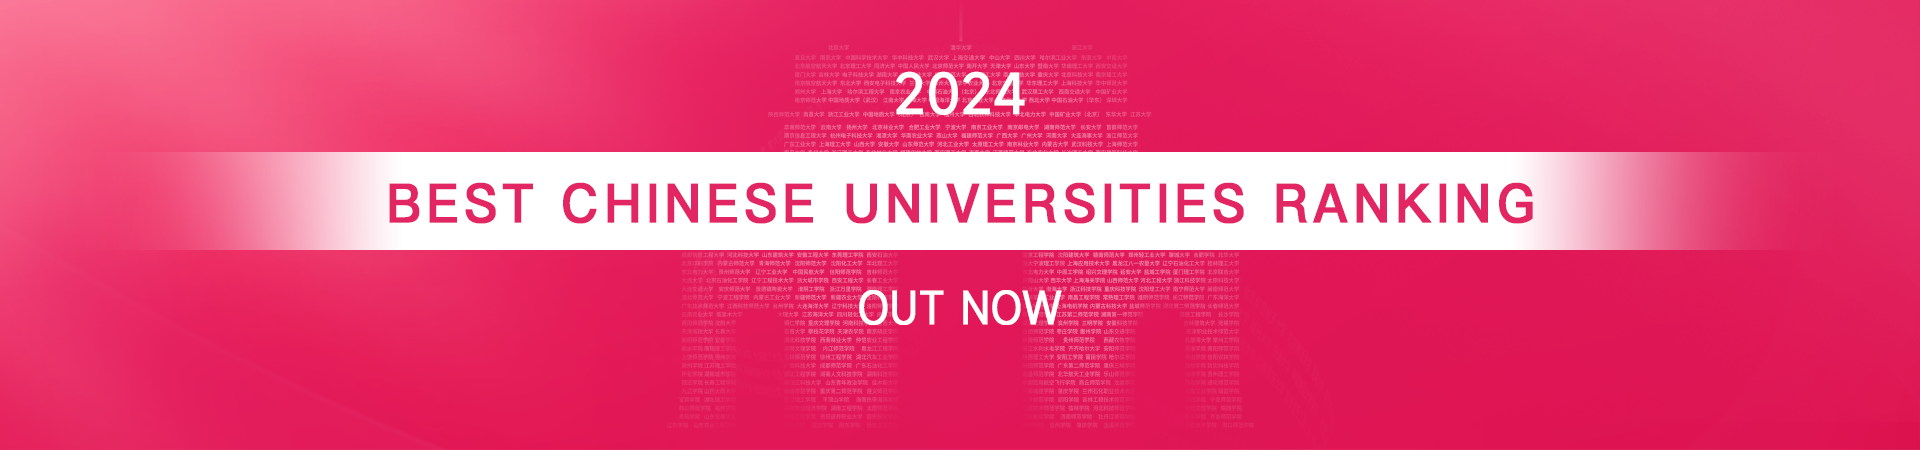 times higher education world university rankings by subject 2022